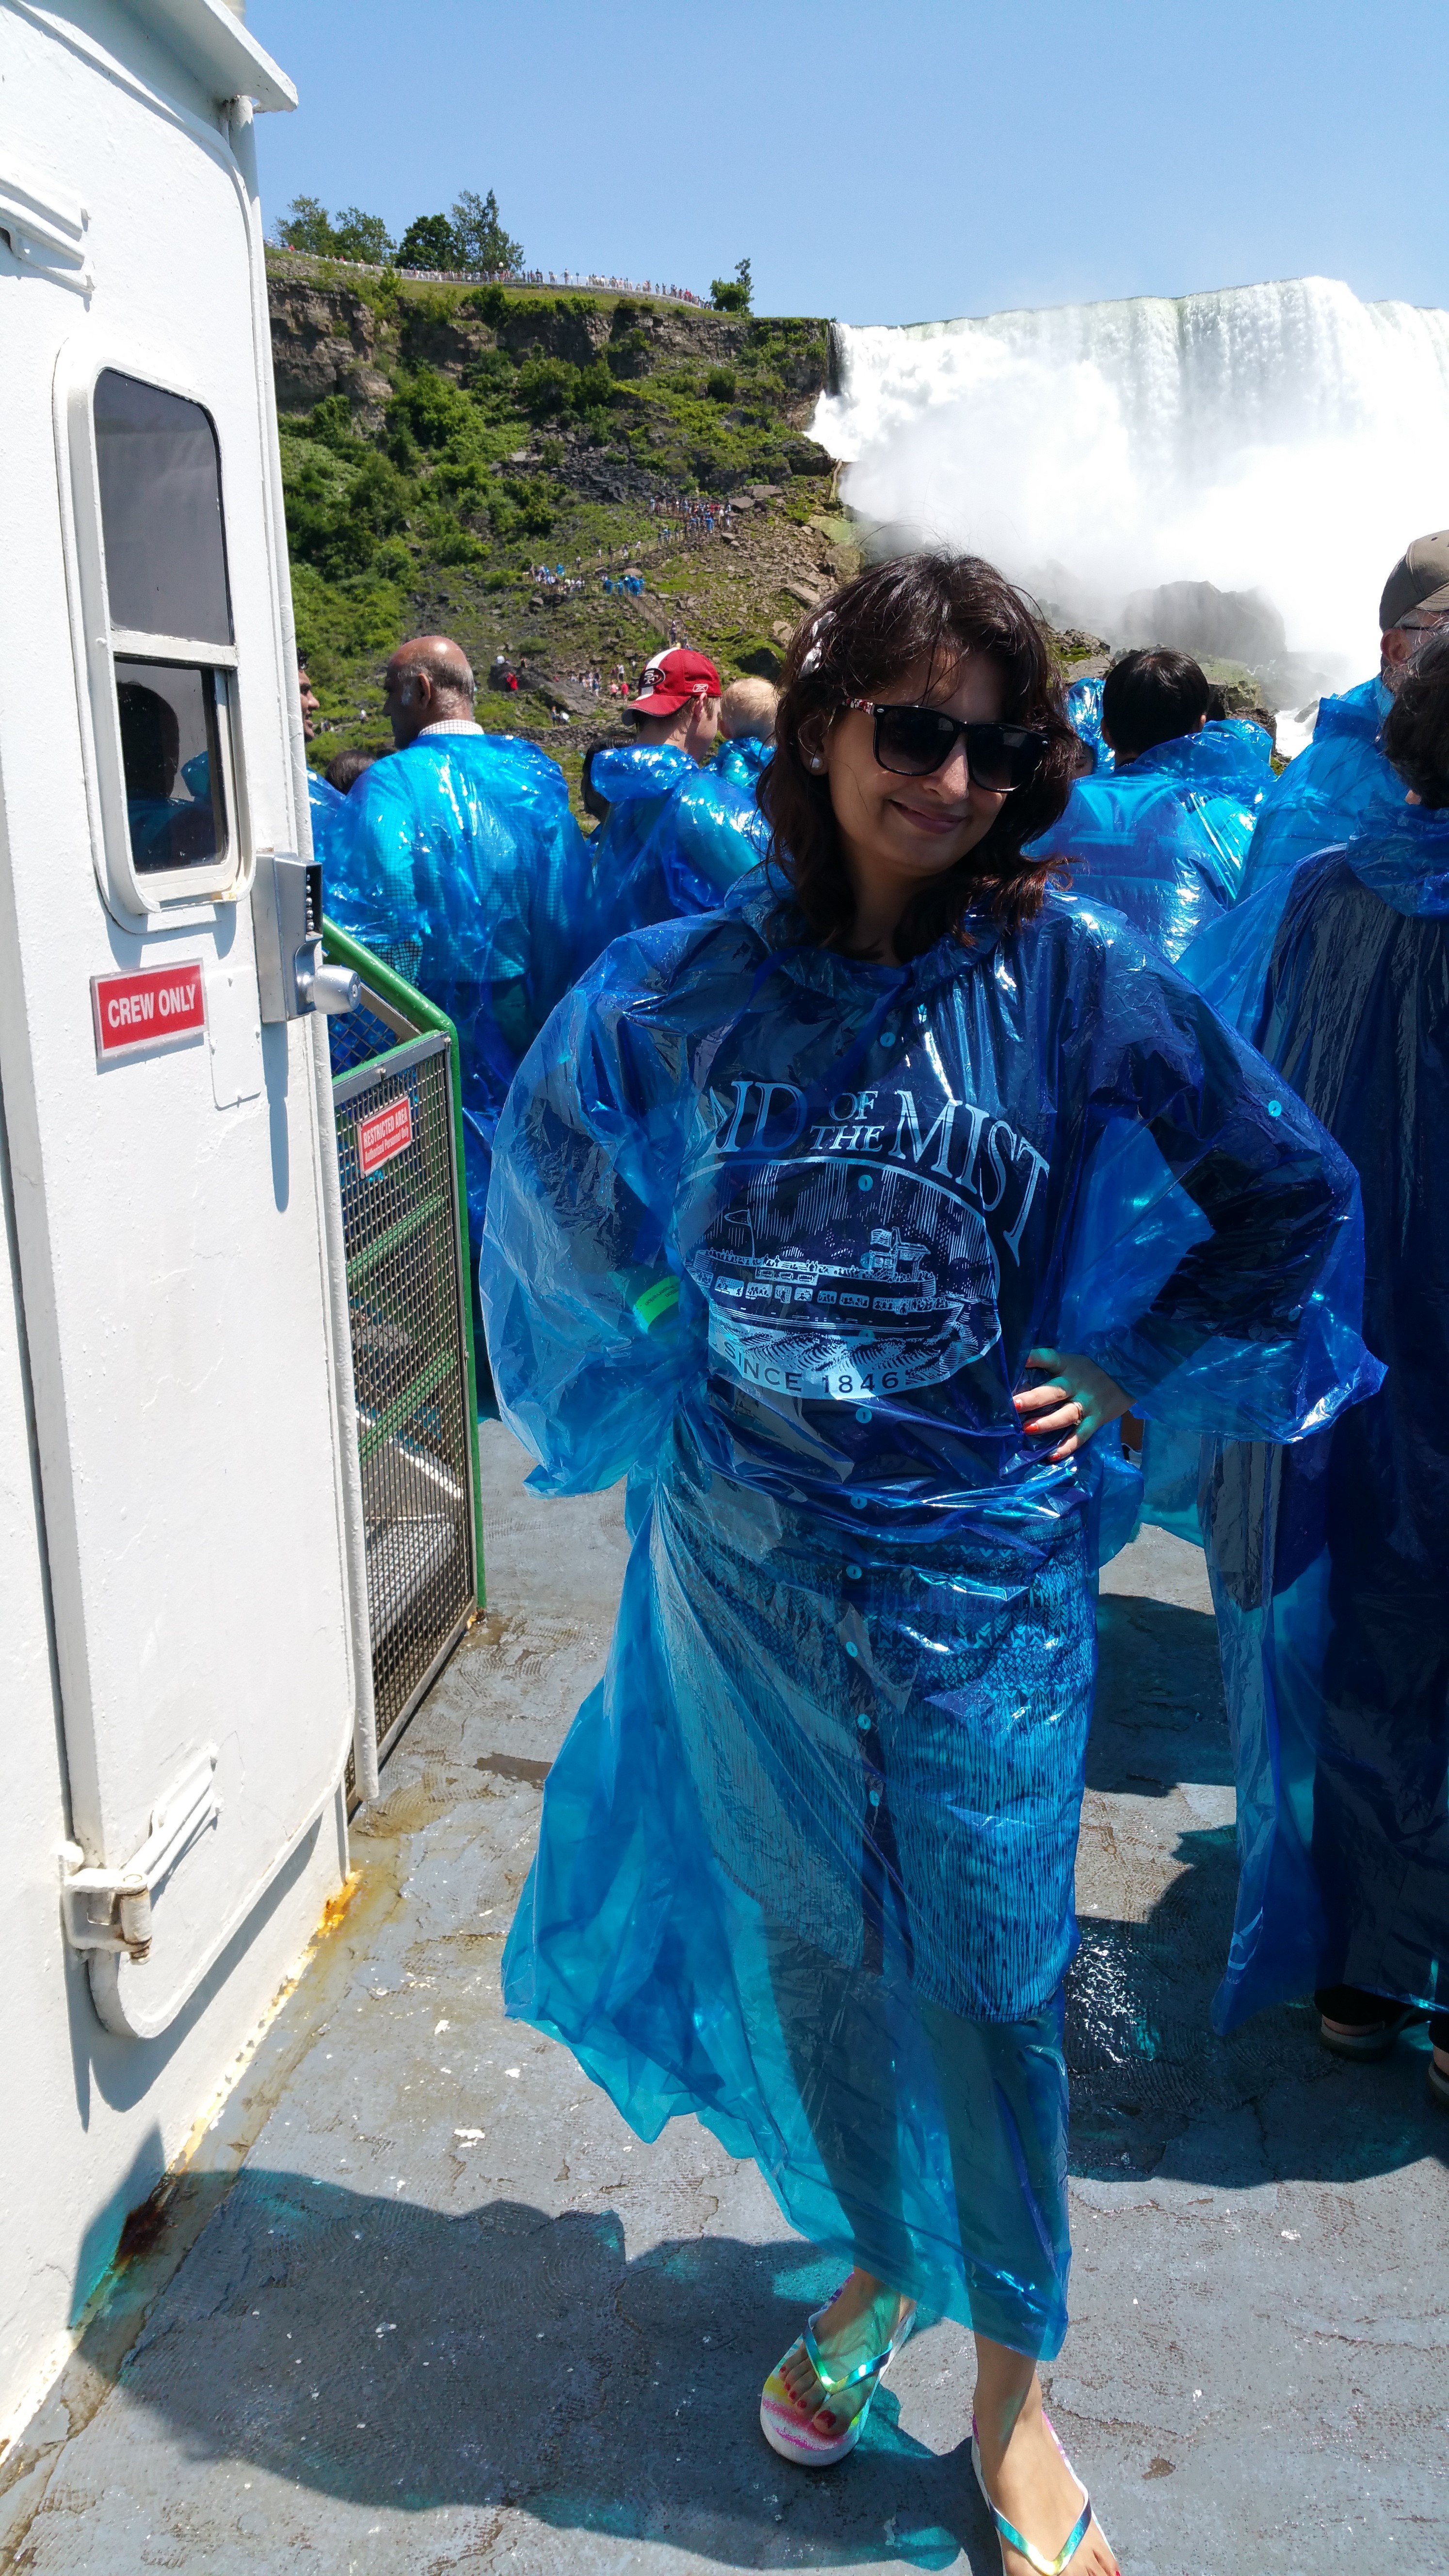 All set to experience the Falls, Maid of the Mist, The Niagara State Park, NY, USA